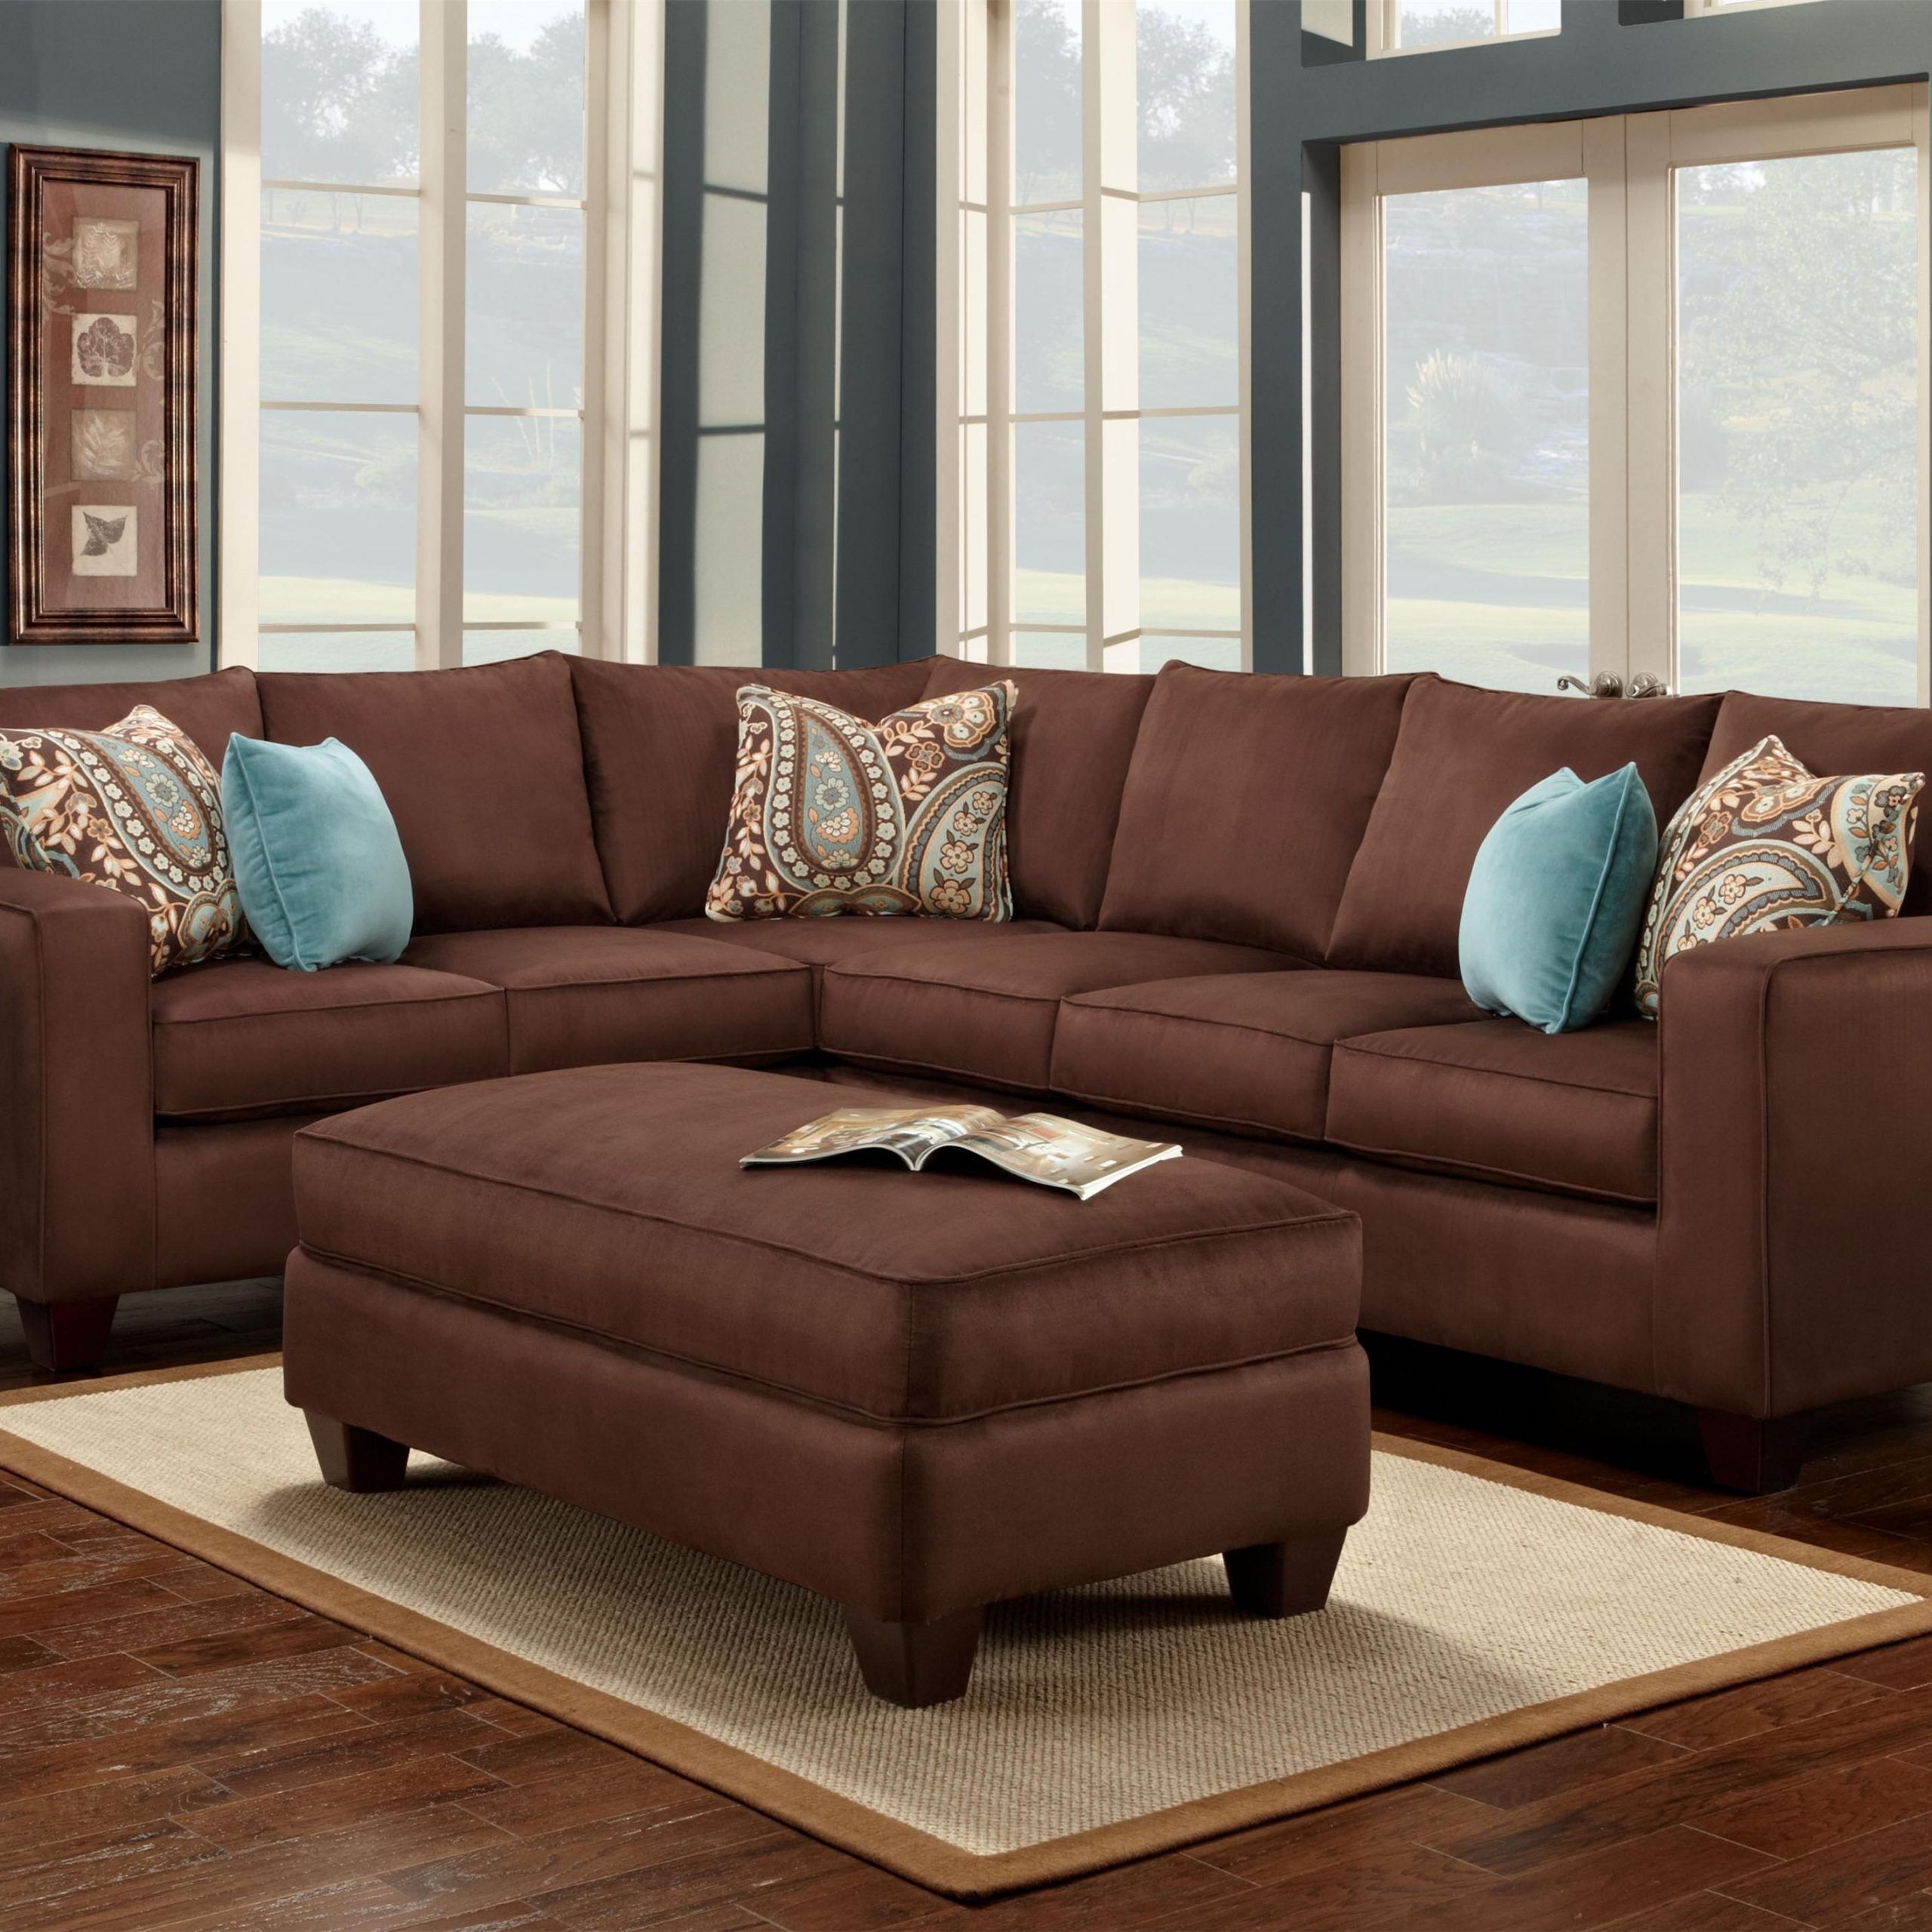 Turquoise Is A Great Accent Color To Chocolate Brown! #Accent #Pillows #Sofa  | Brown Living Room Decor, Brown Couch Living Room, Brown Sofa Living Room Inside Sofas In Chocolate Brown (Photo 1 of 15)